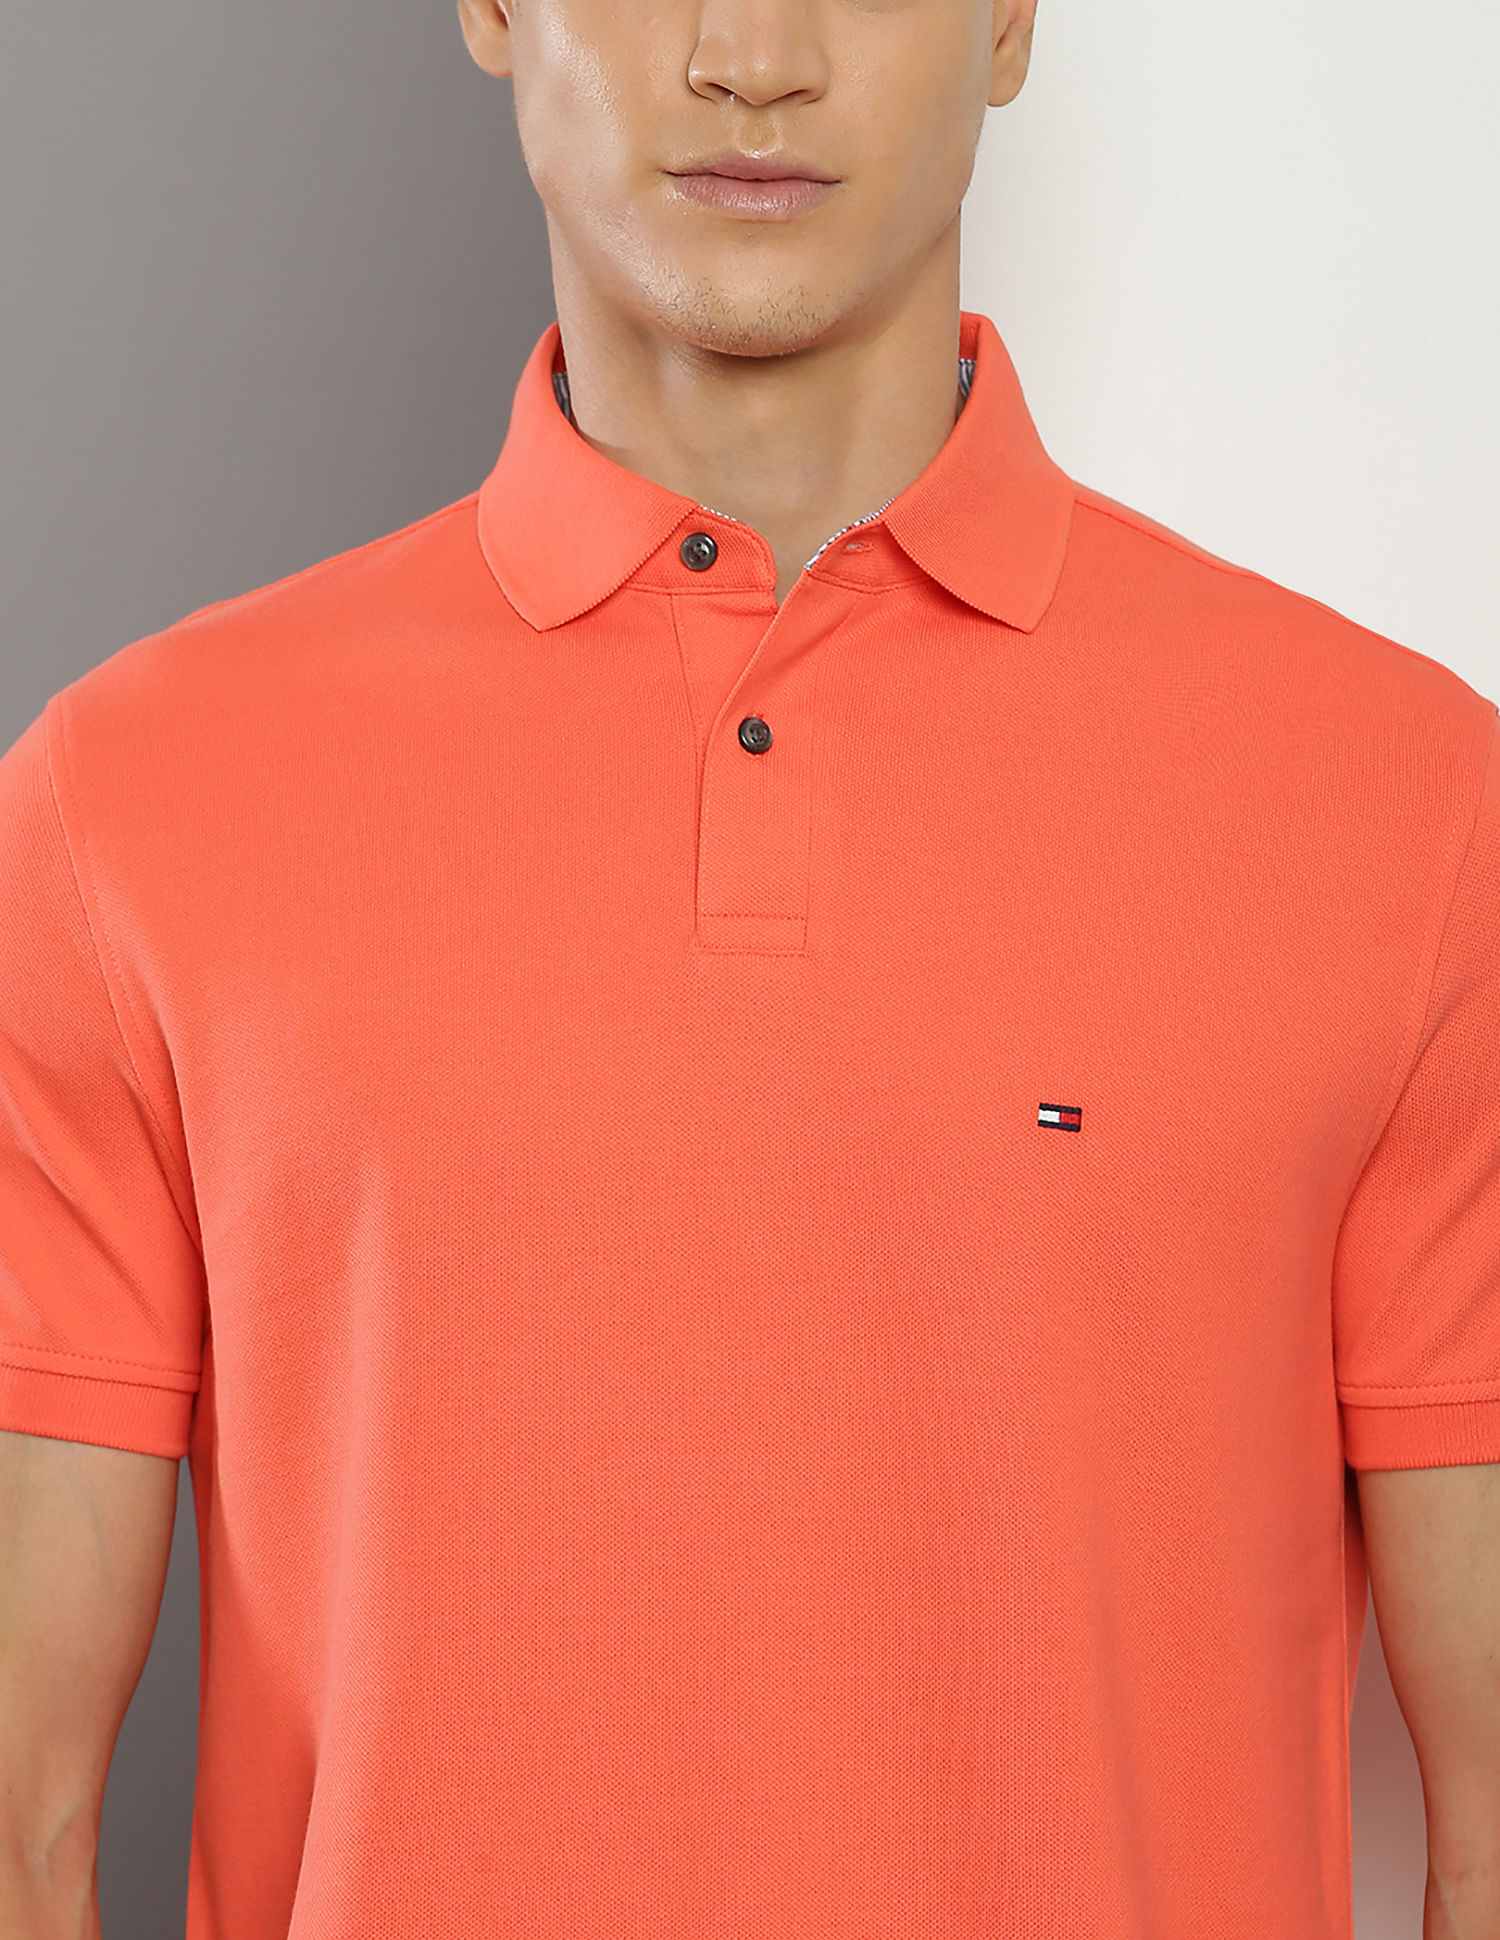 Buy Tommy Hilfiger Organic Cotton 1985 Solid Polo Shirt